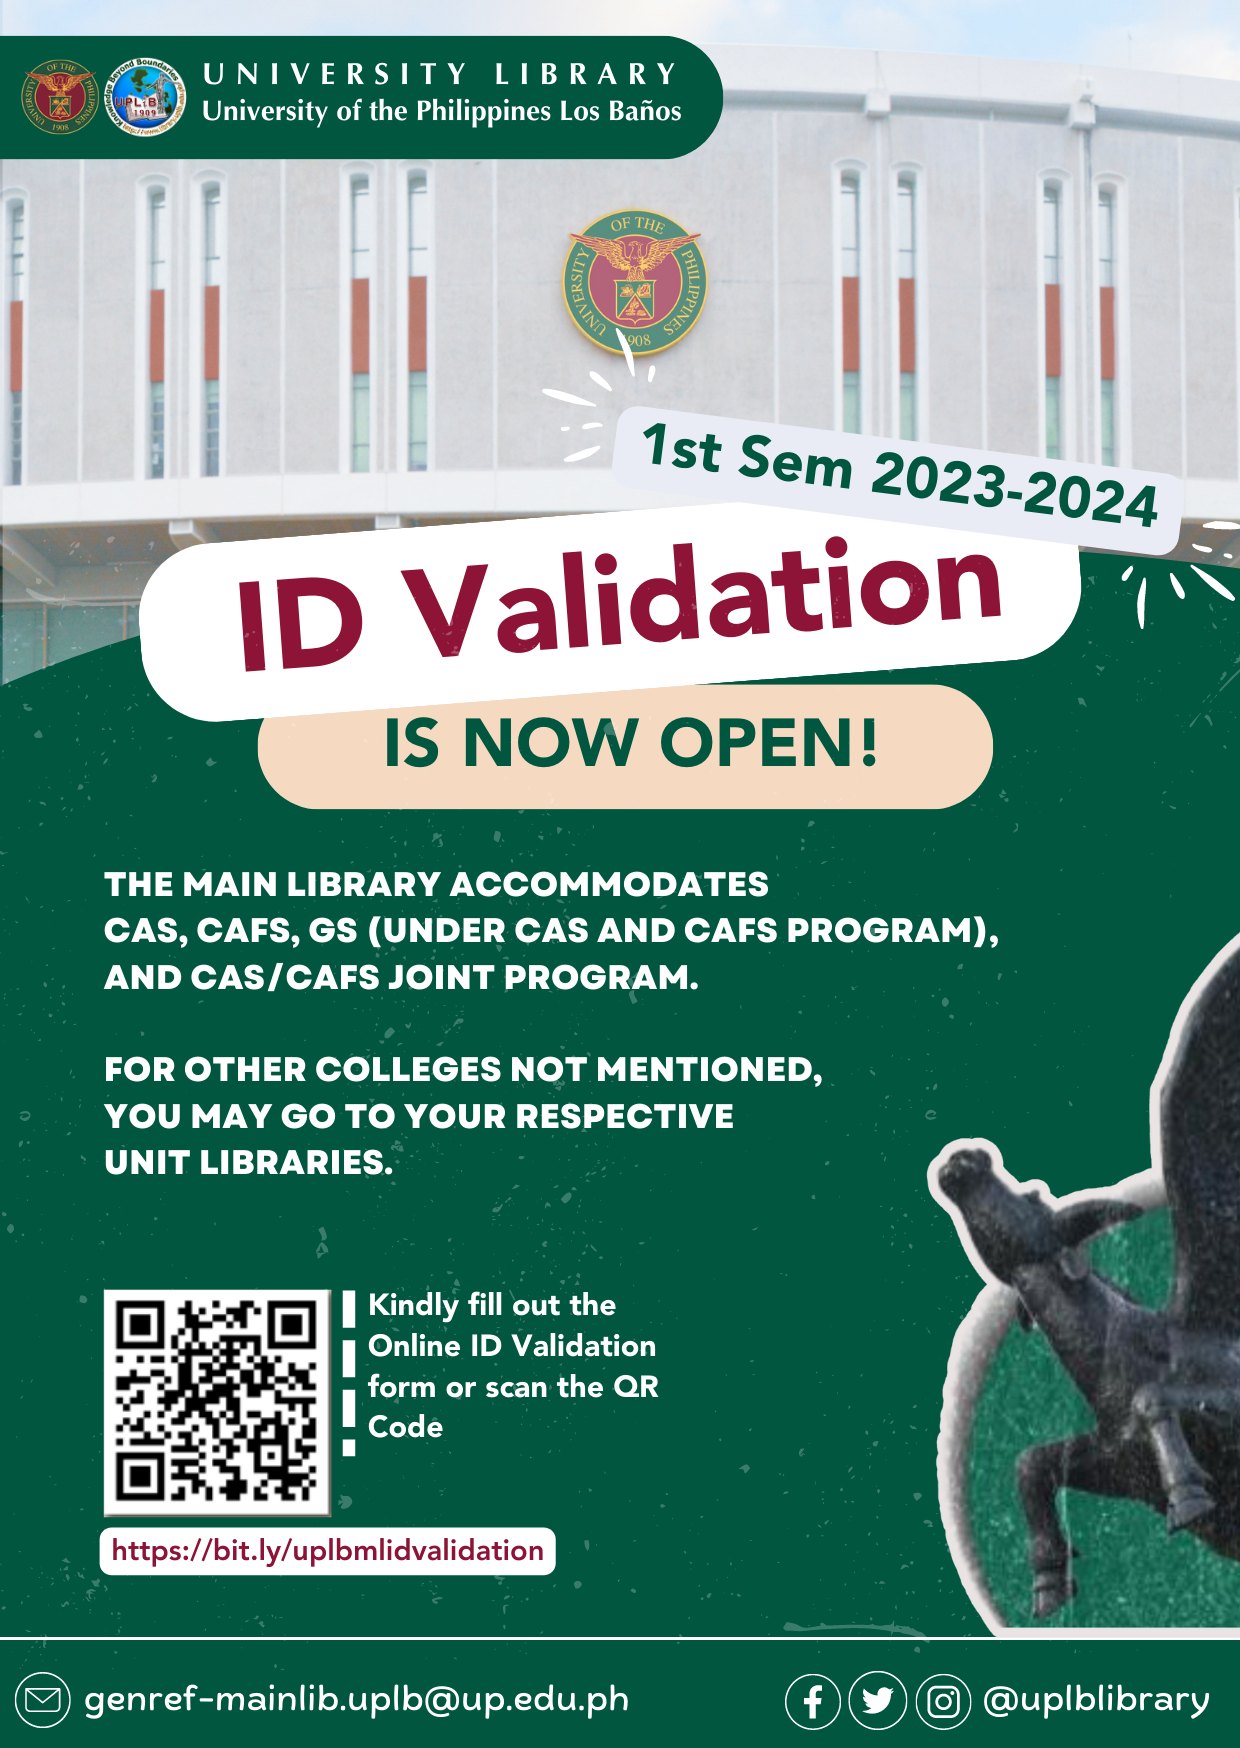 Online ID Validation for 1st Semester of 2023-2024 is now open.